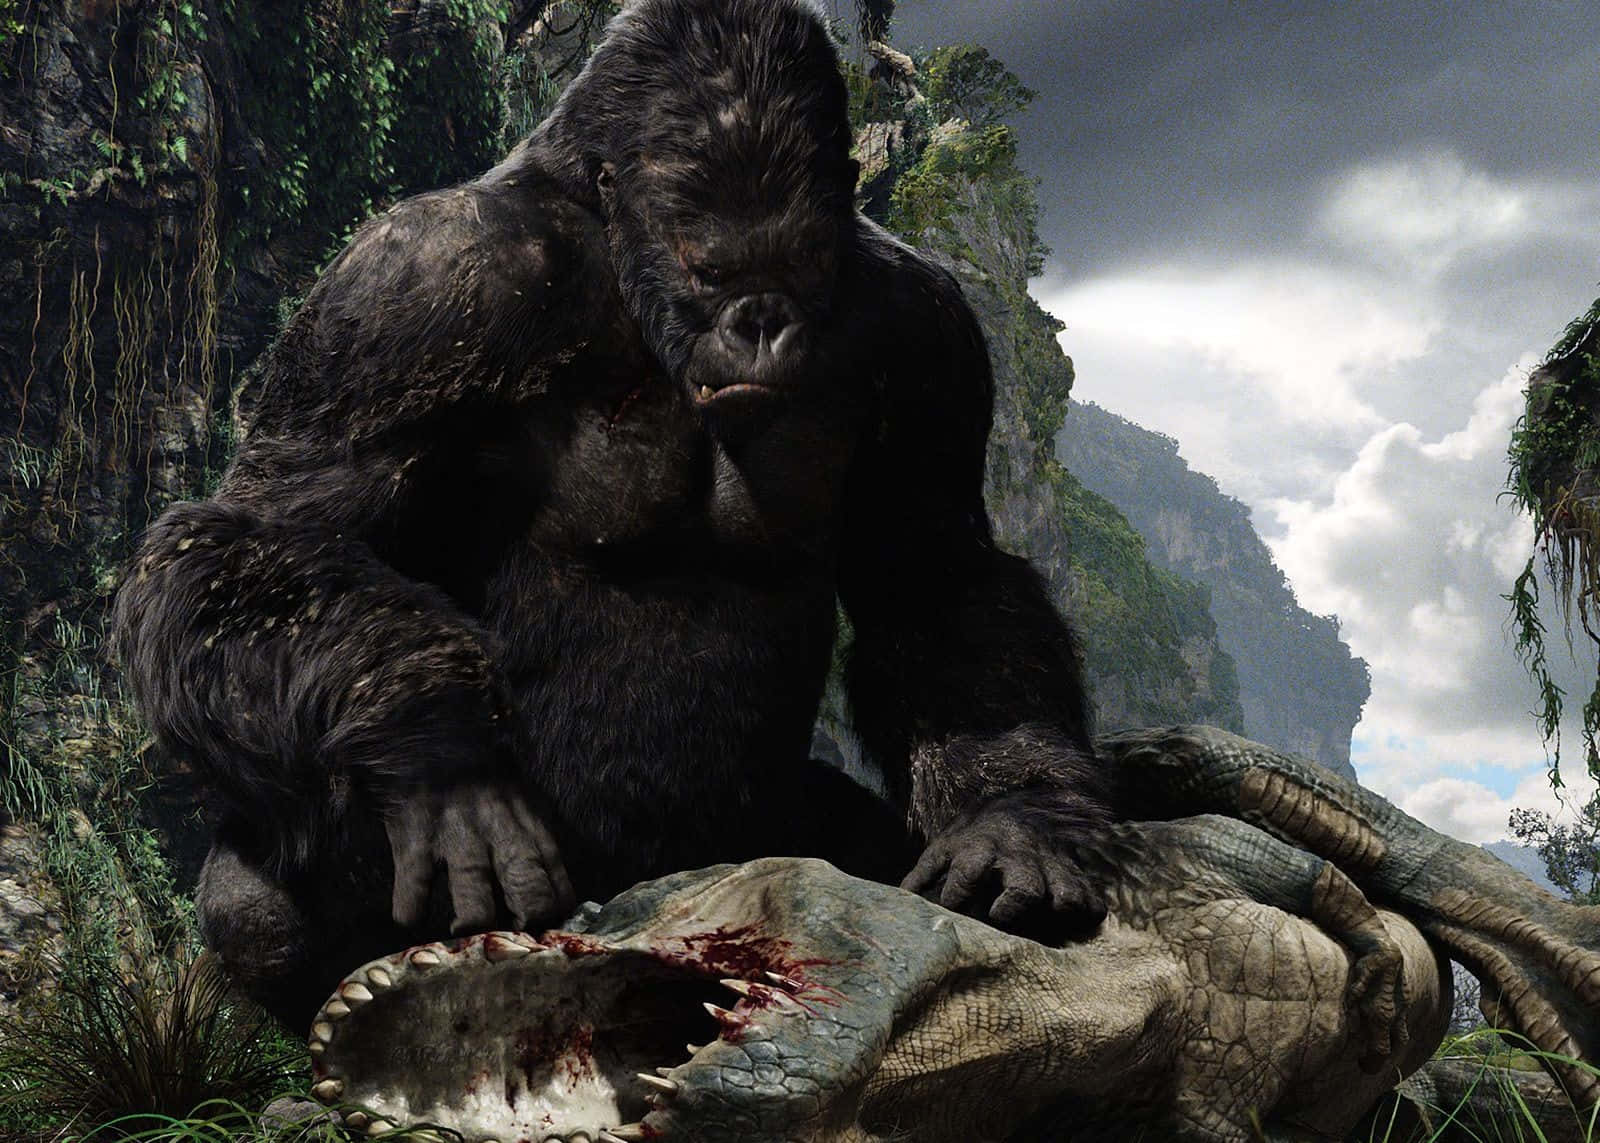 The mighty King Kong fighting for survival